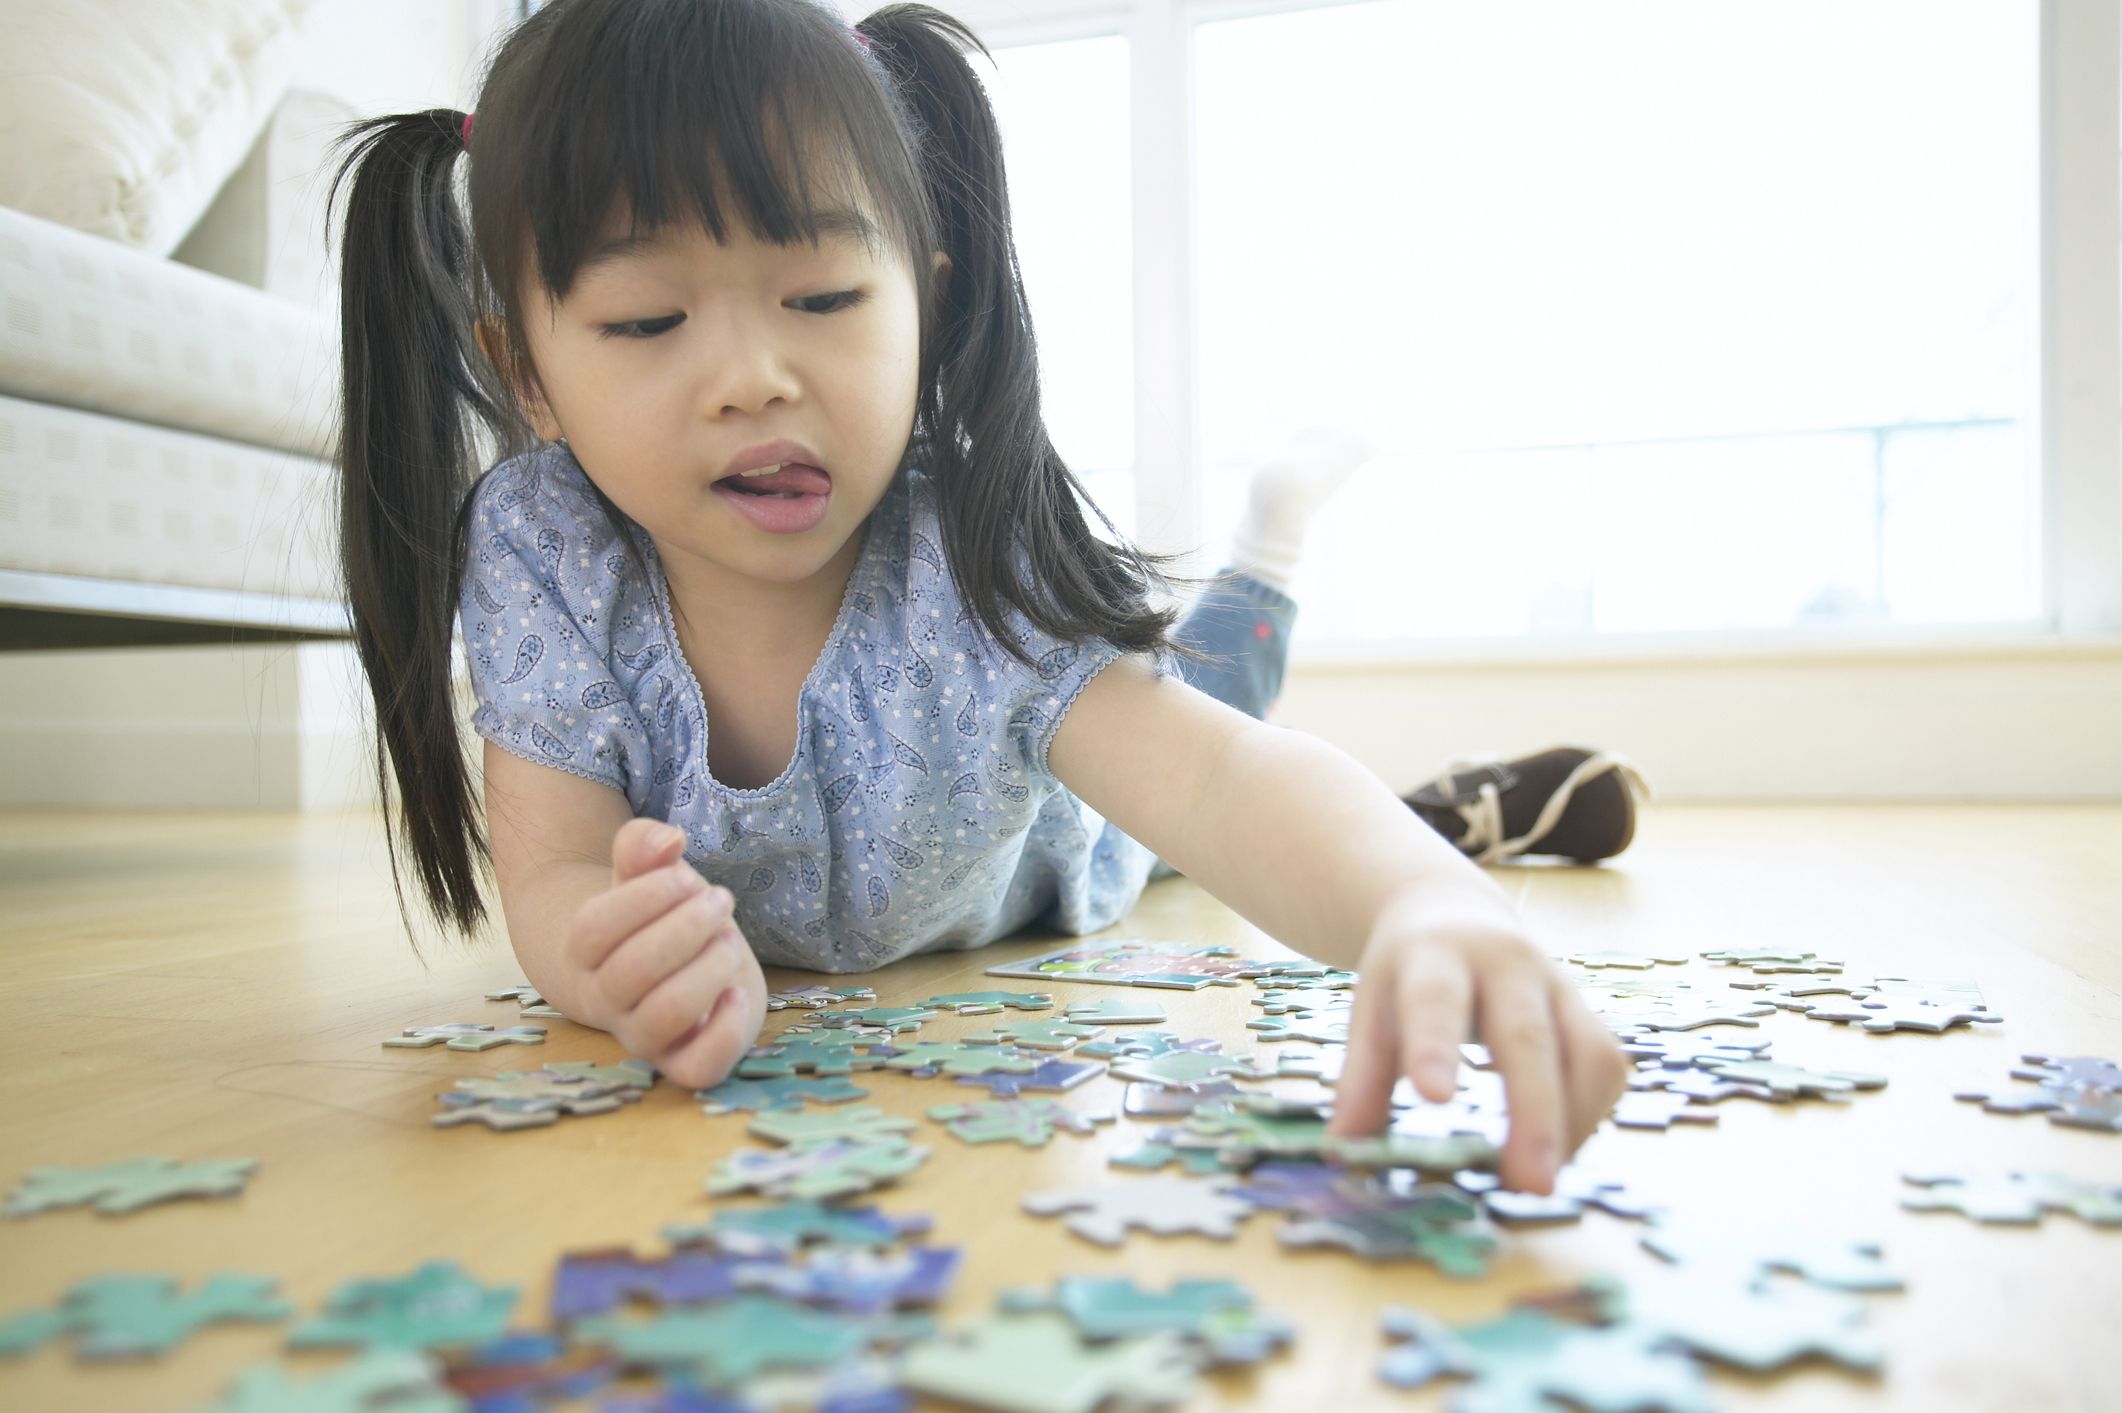 Puzzle Games for Toddlers